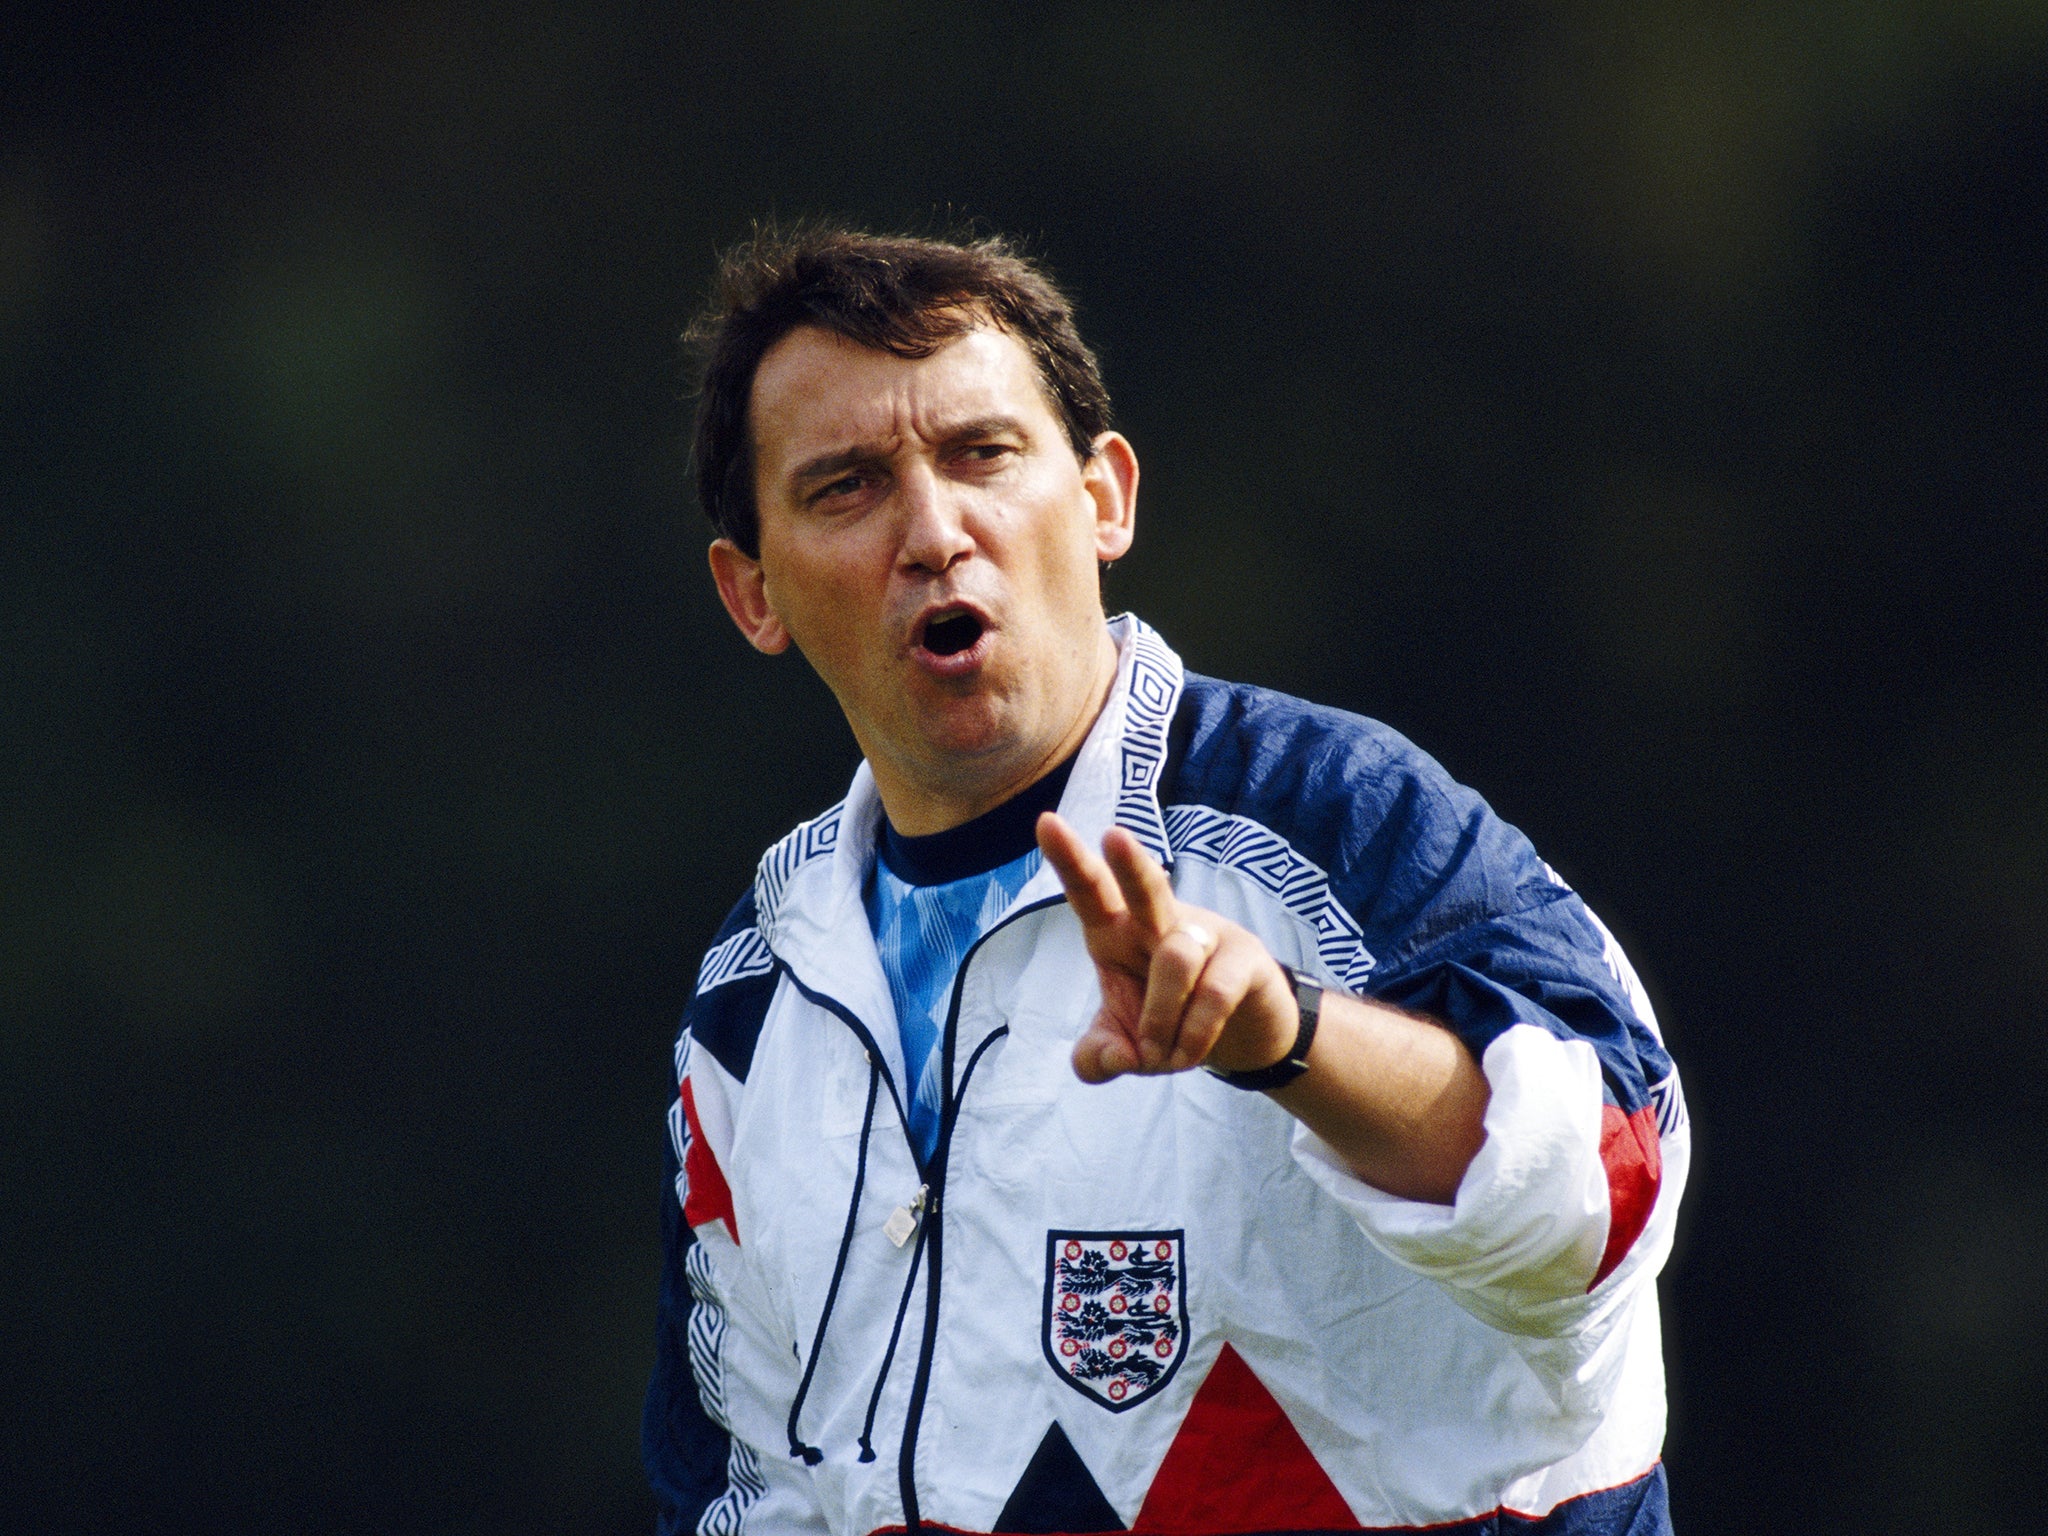 Graham Taylor has denied claims that he was asked to limit the number of black players in the England team